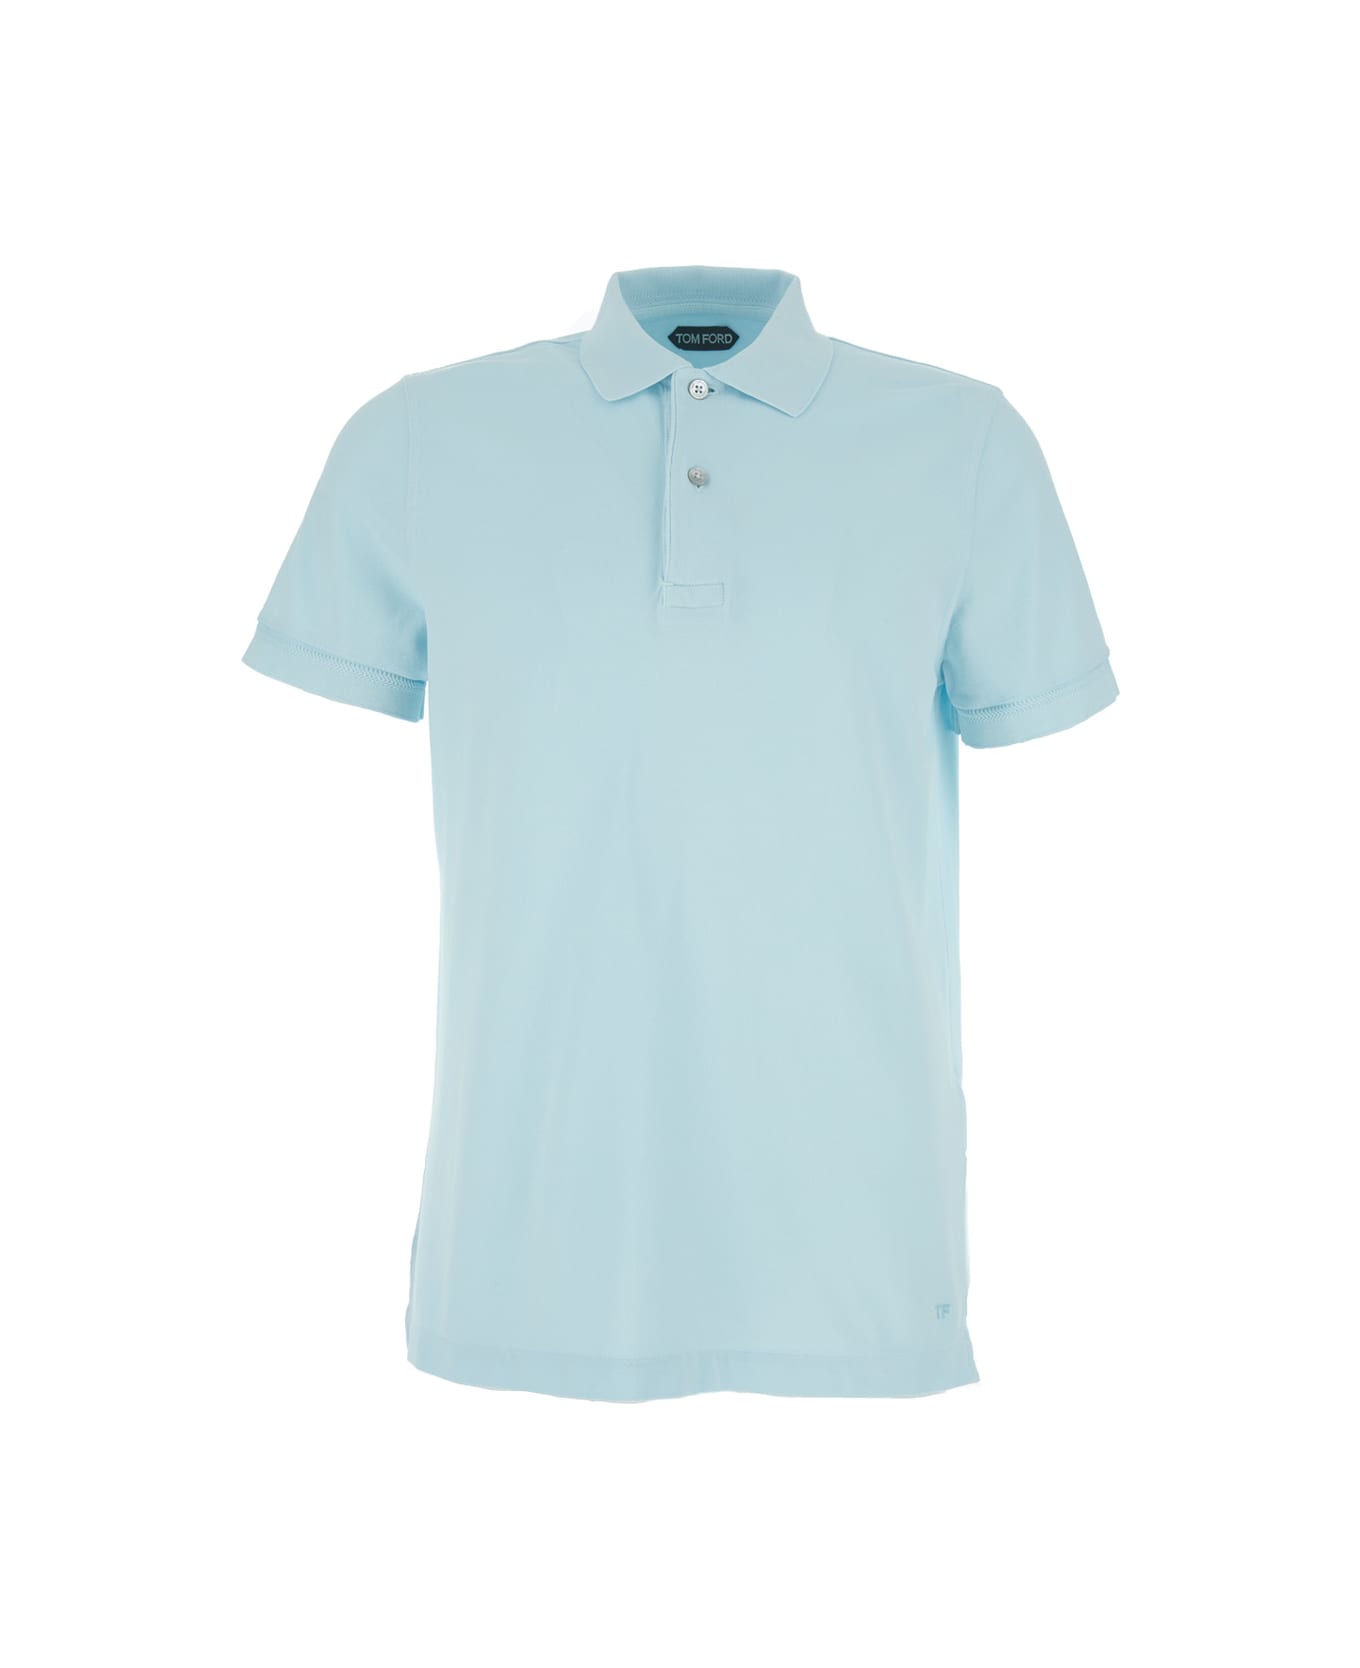 Tom Ford Light-blue Piquet Polo T-shirt In Cotton Man - Light blue ポロシャツ